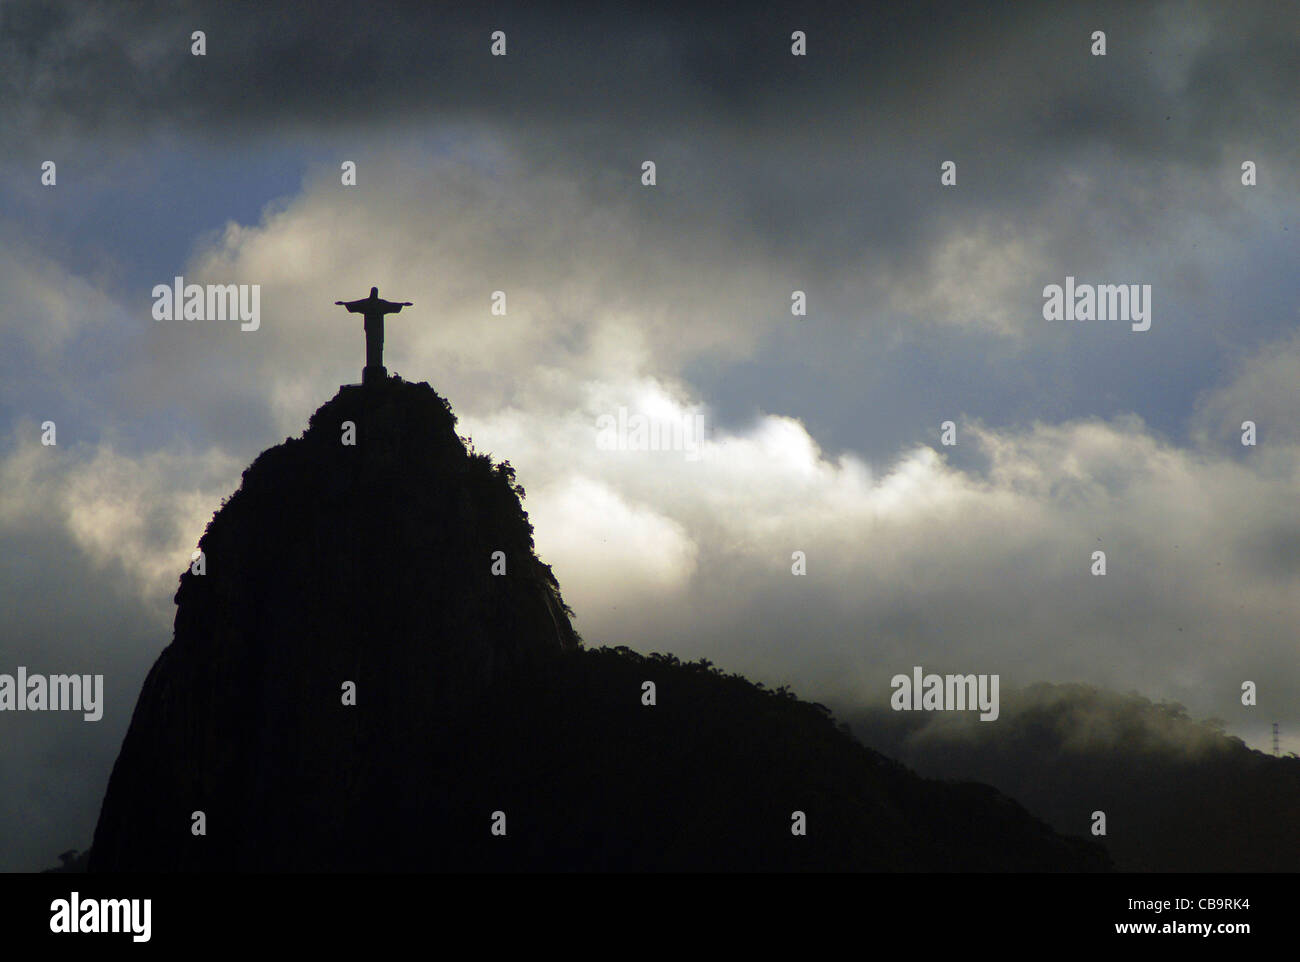 CHRIST THE REDEEMER SILHOUTTED AGAINST THE CLOUDS AT RIO DE JANEIRO, BRAZIL Stock Photo